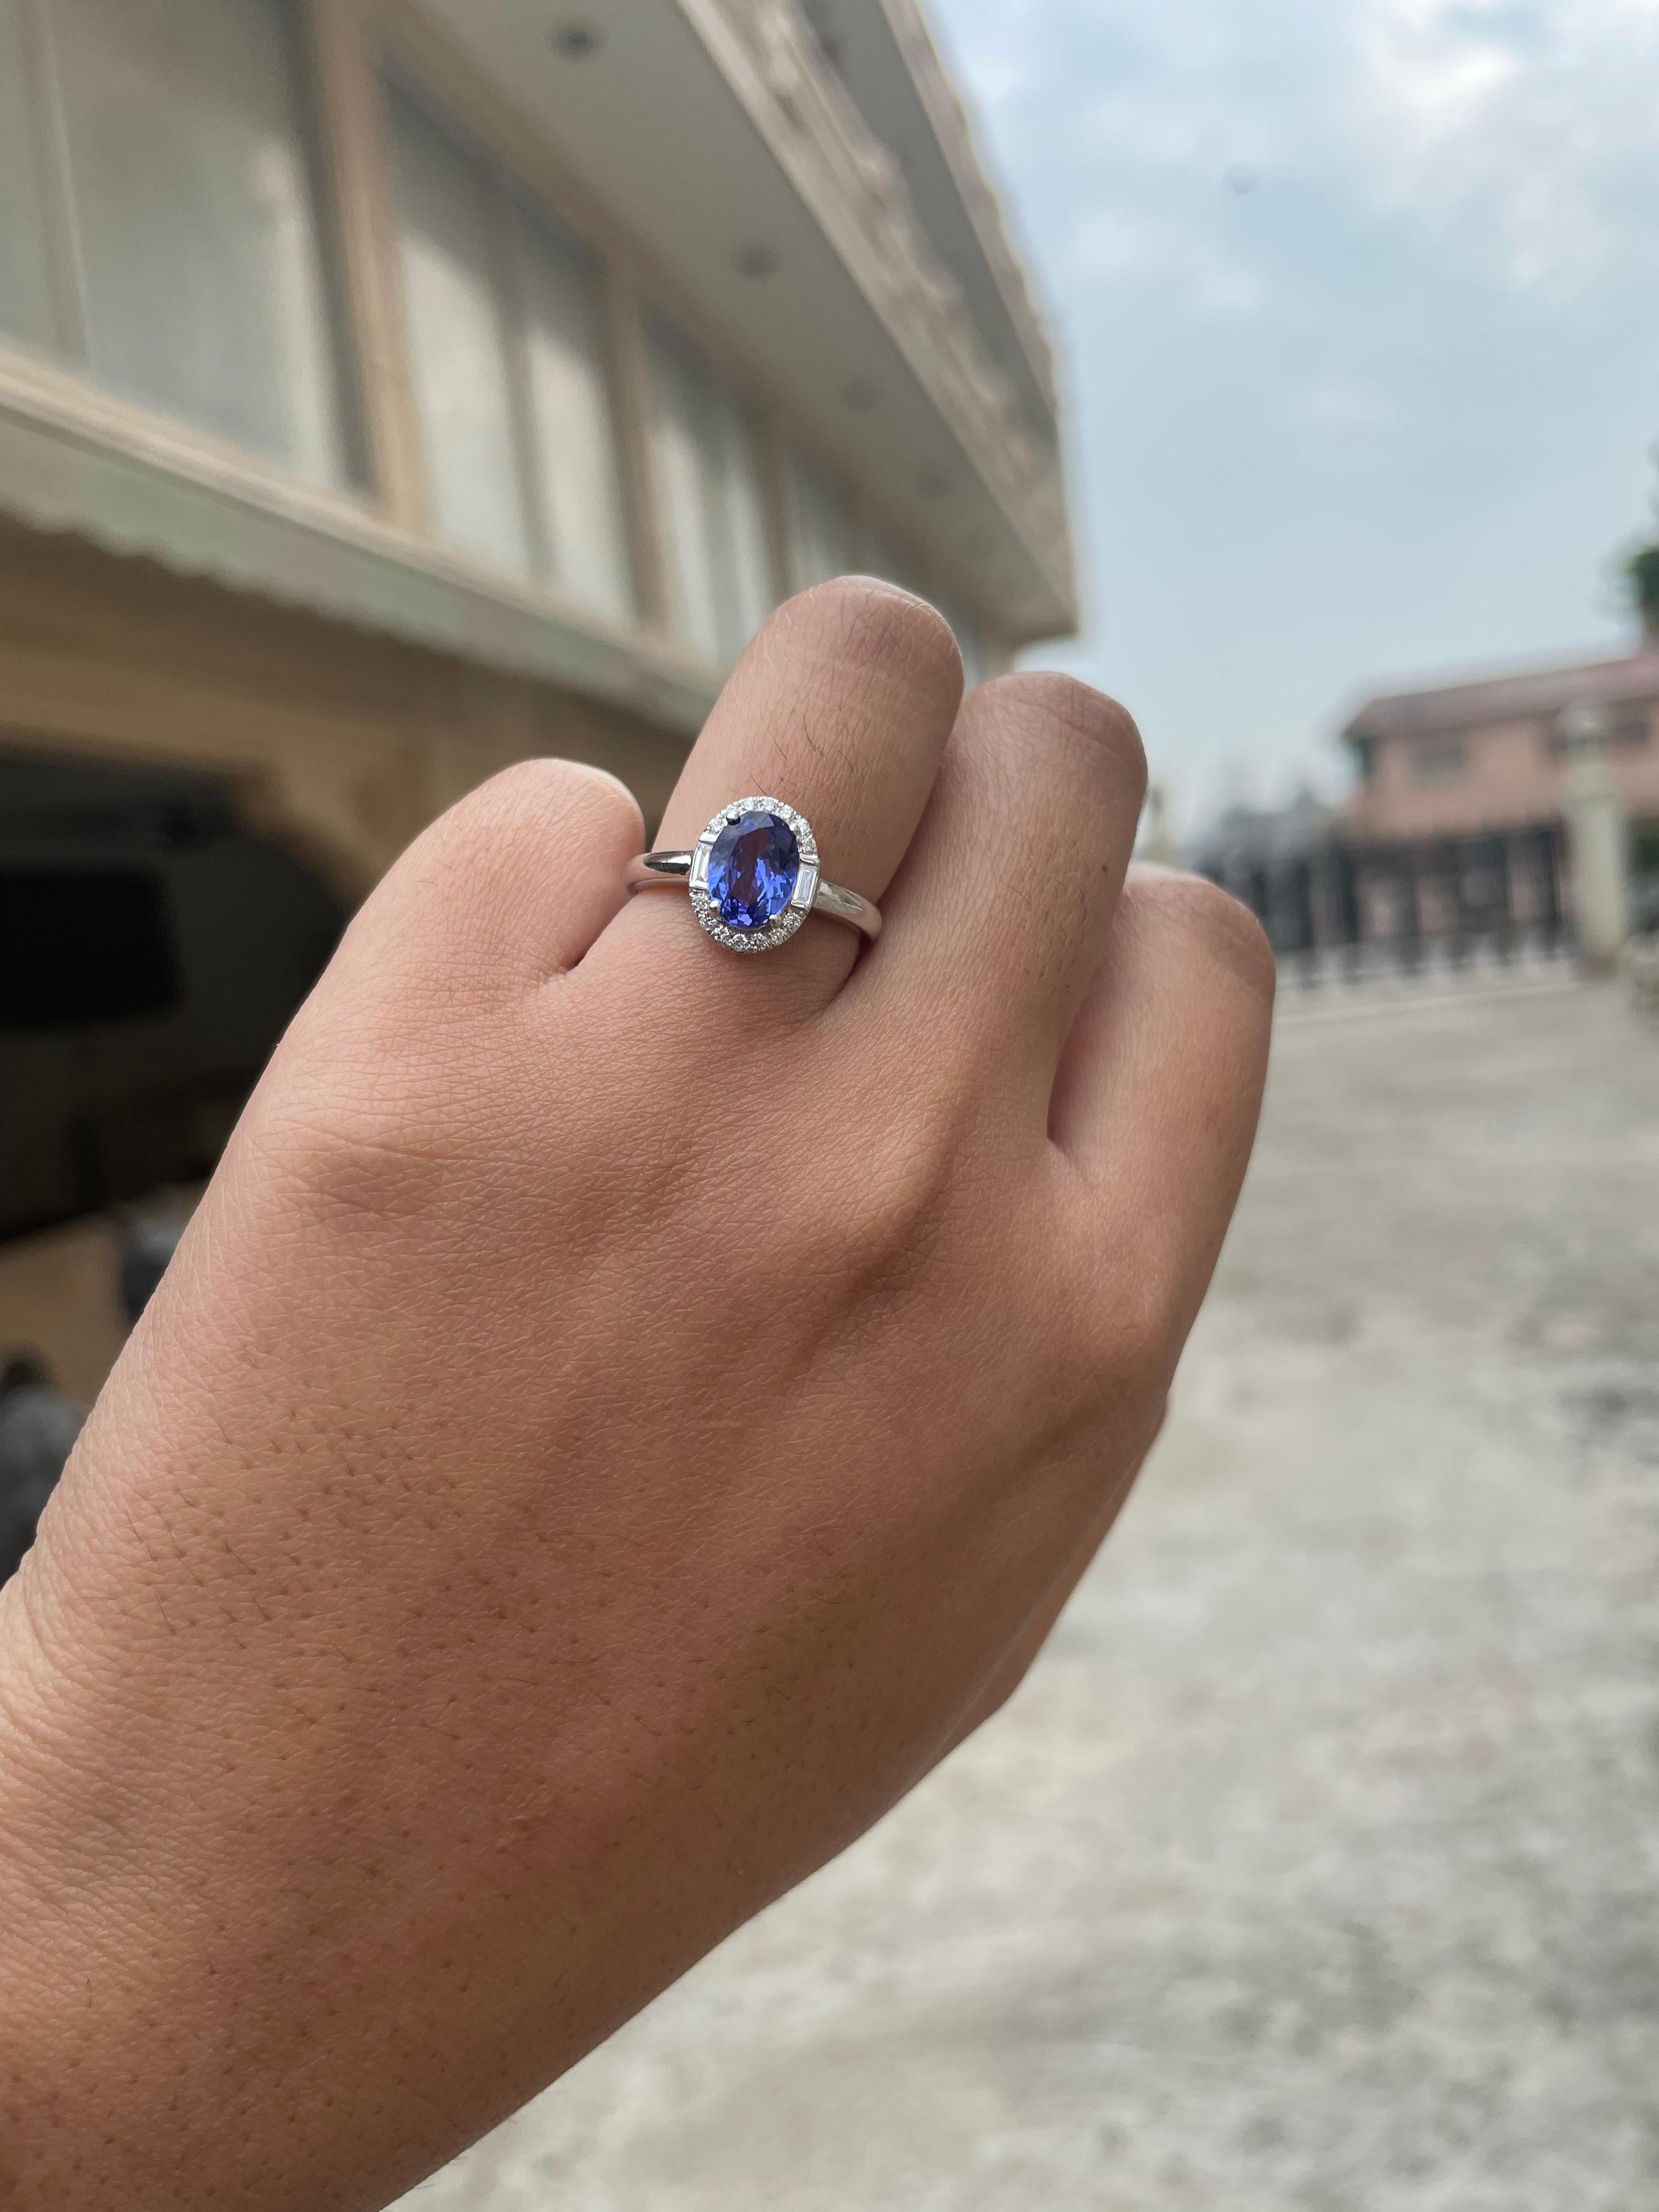 For Sale:  Oval Shape Tanzanite and Diamond Wedding Ring in 18k Solid White Gold 5